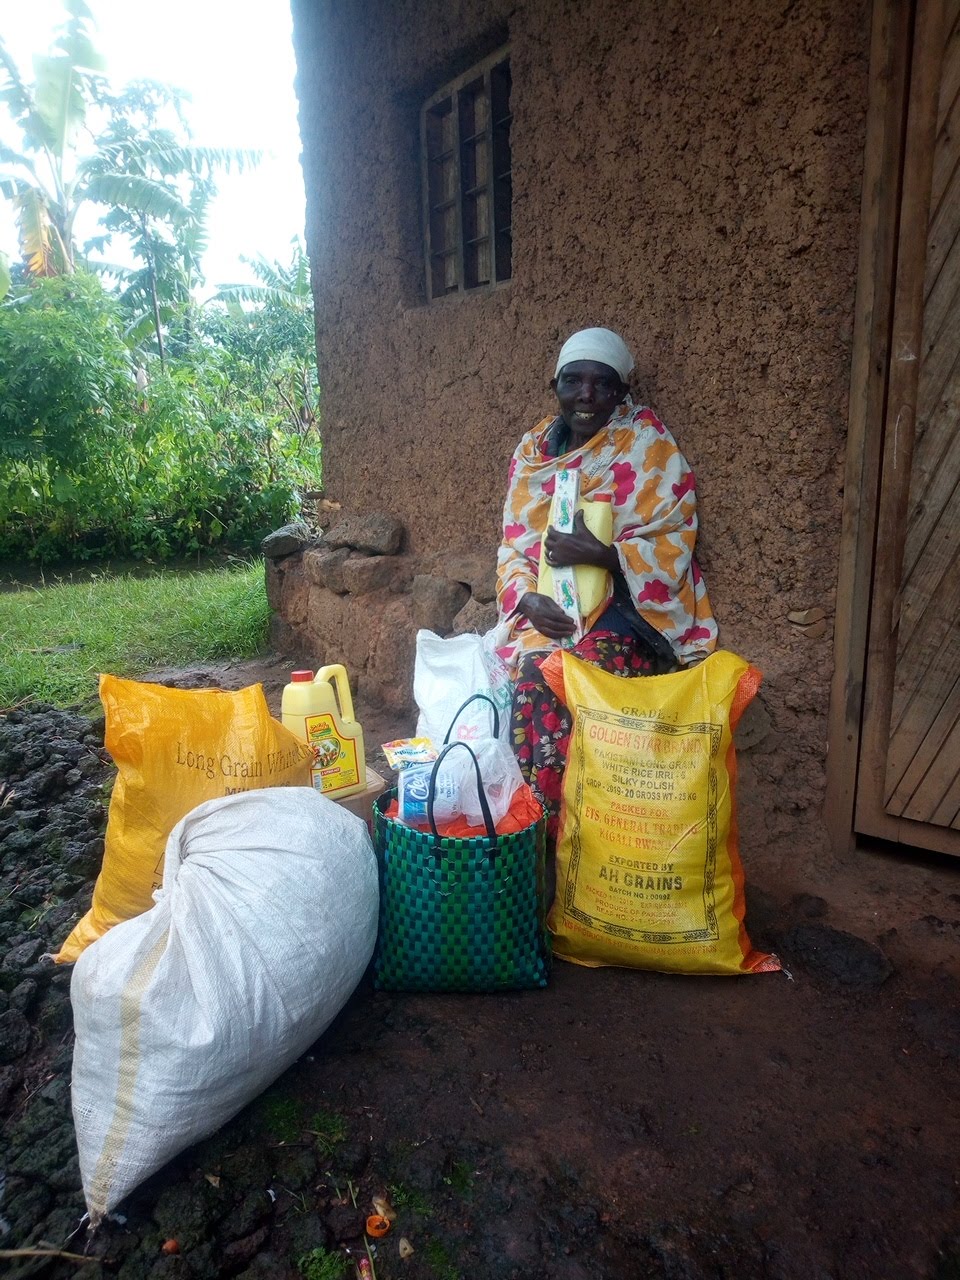 A woman sits with food she has received